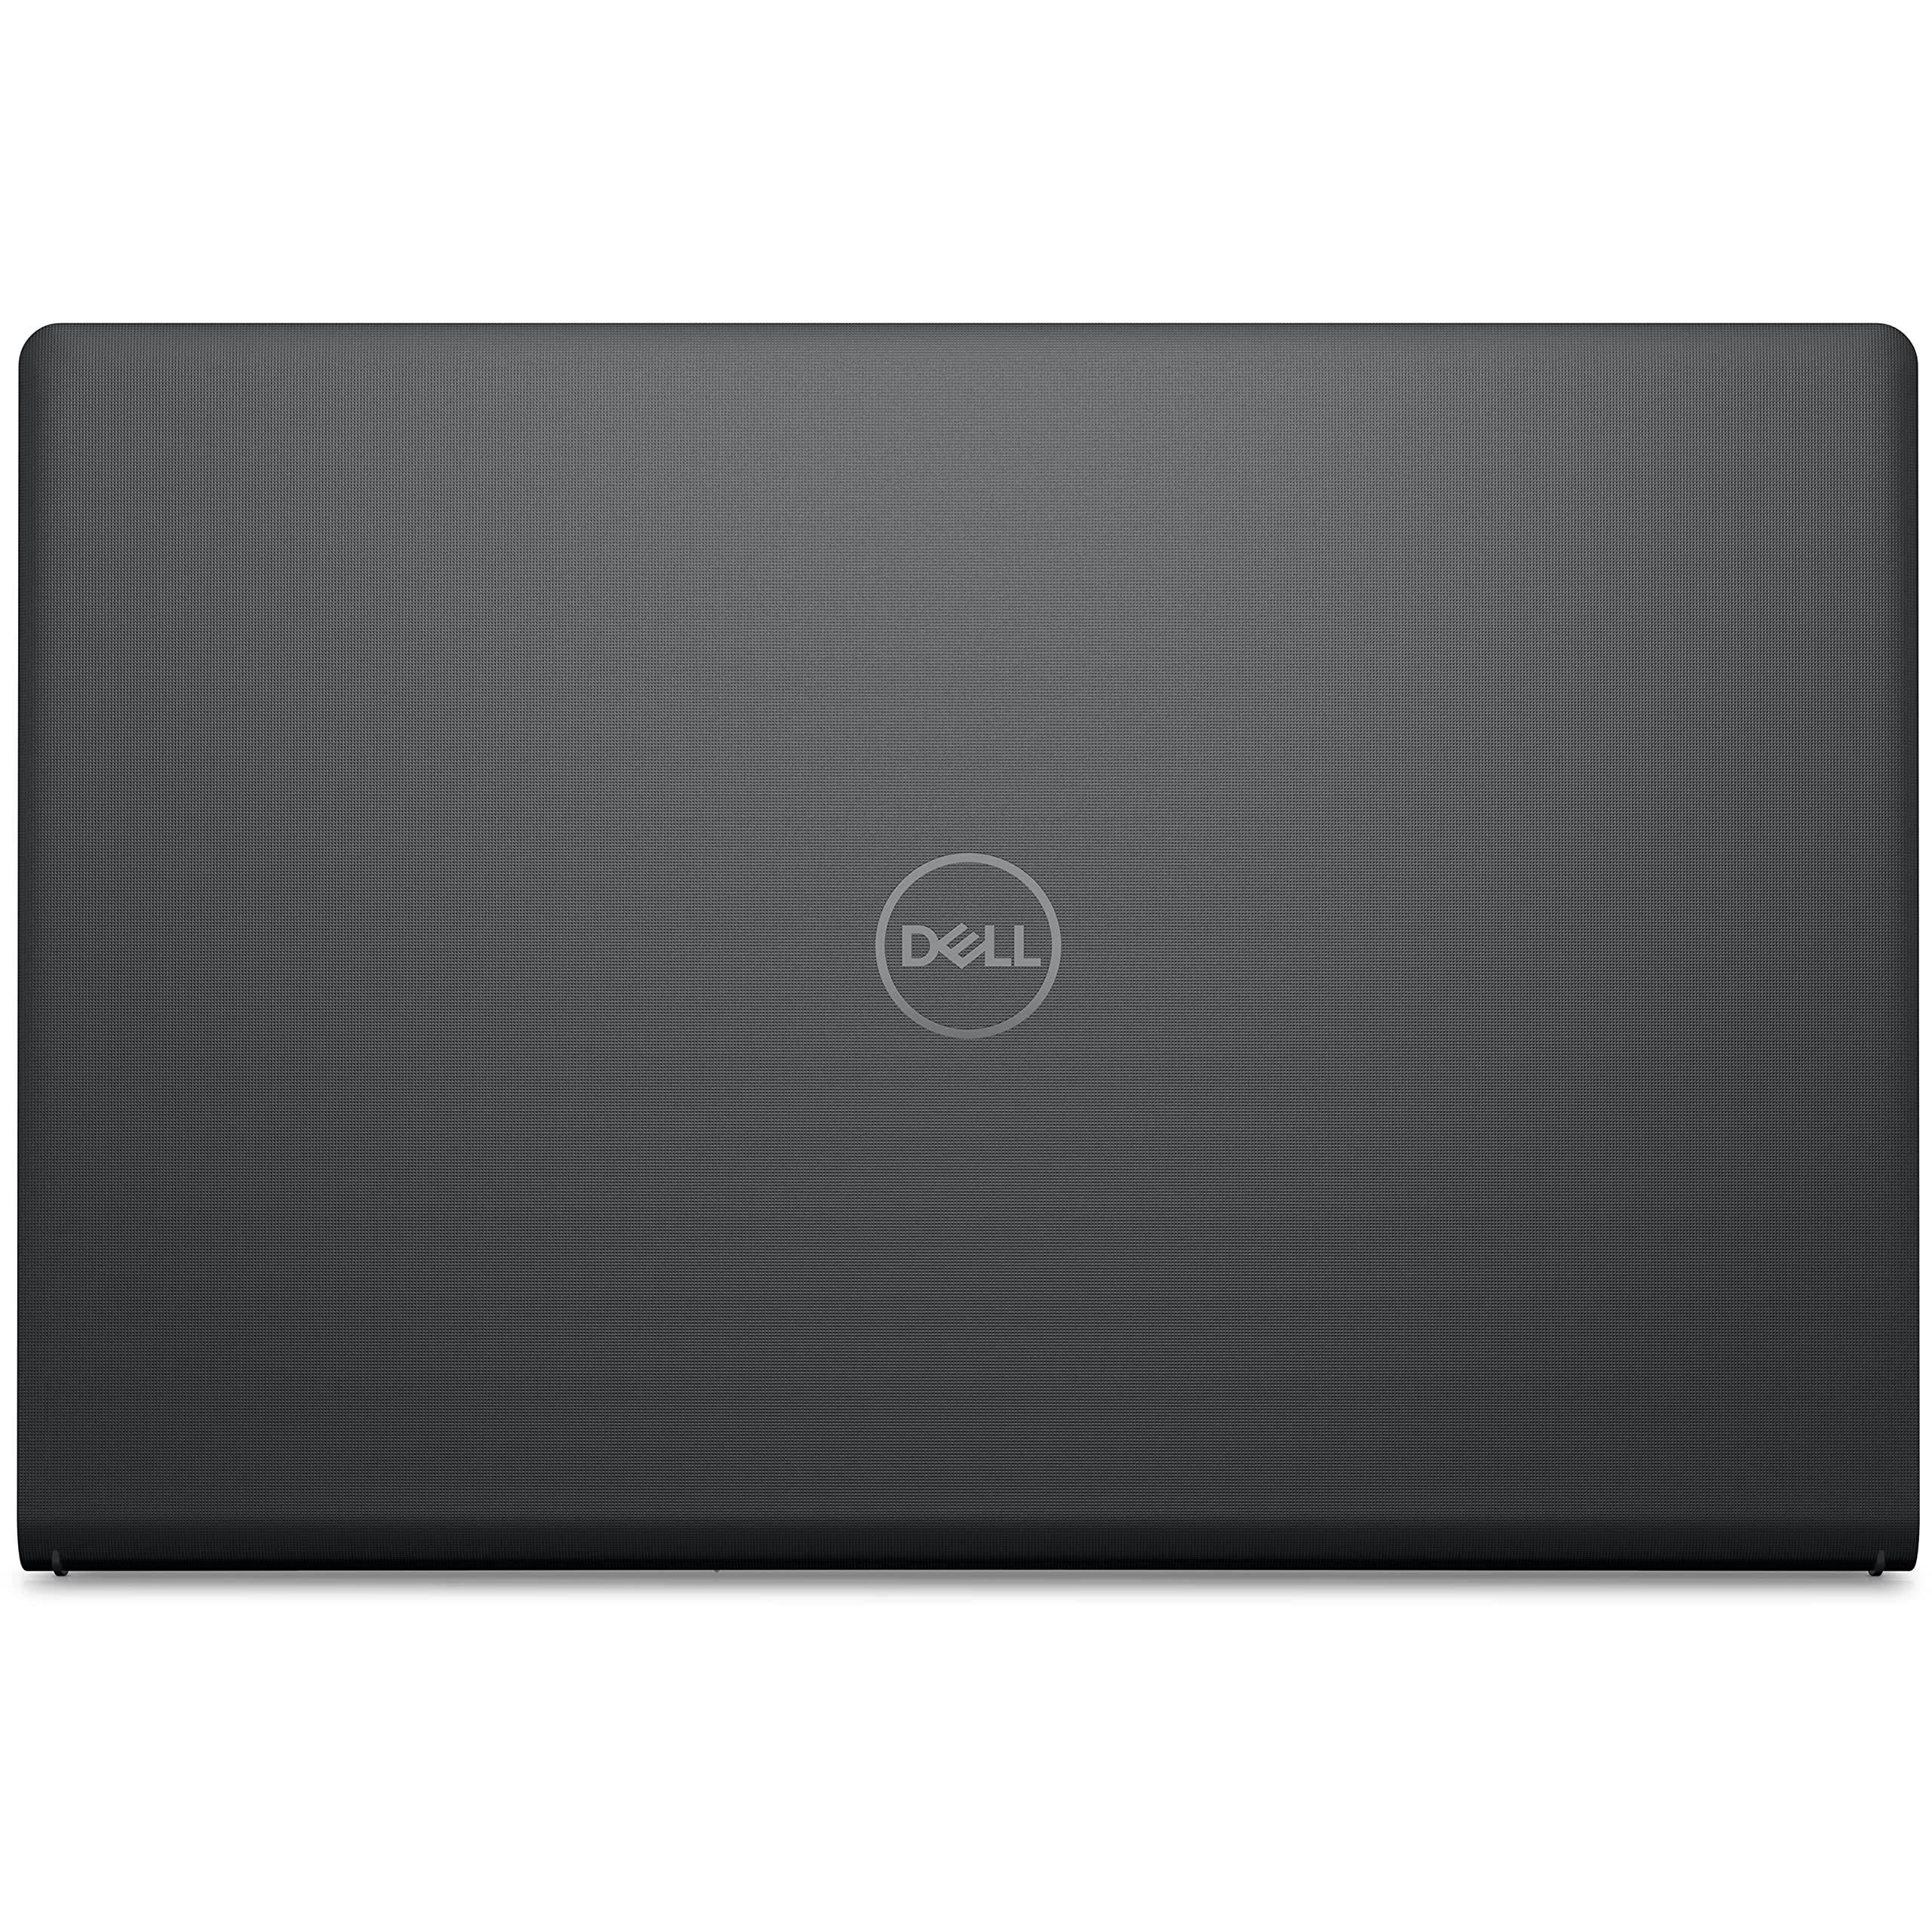 Dell Vostro 3510 15.6" FHD Business Laptop Computer, Intel Quad-Core i7-1165G7 up to 4.7GHz, 64GB DDR4 RAM, 2TB PCIe SSD, 802.11AC WiFi, Bluetooth, Carbon Black, Windows 11 Professional